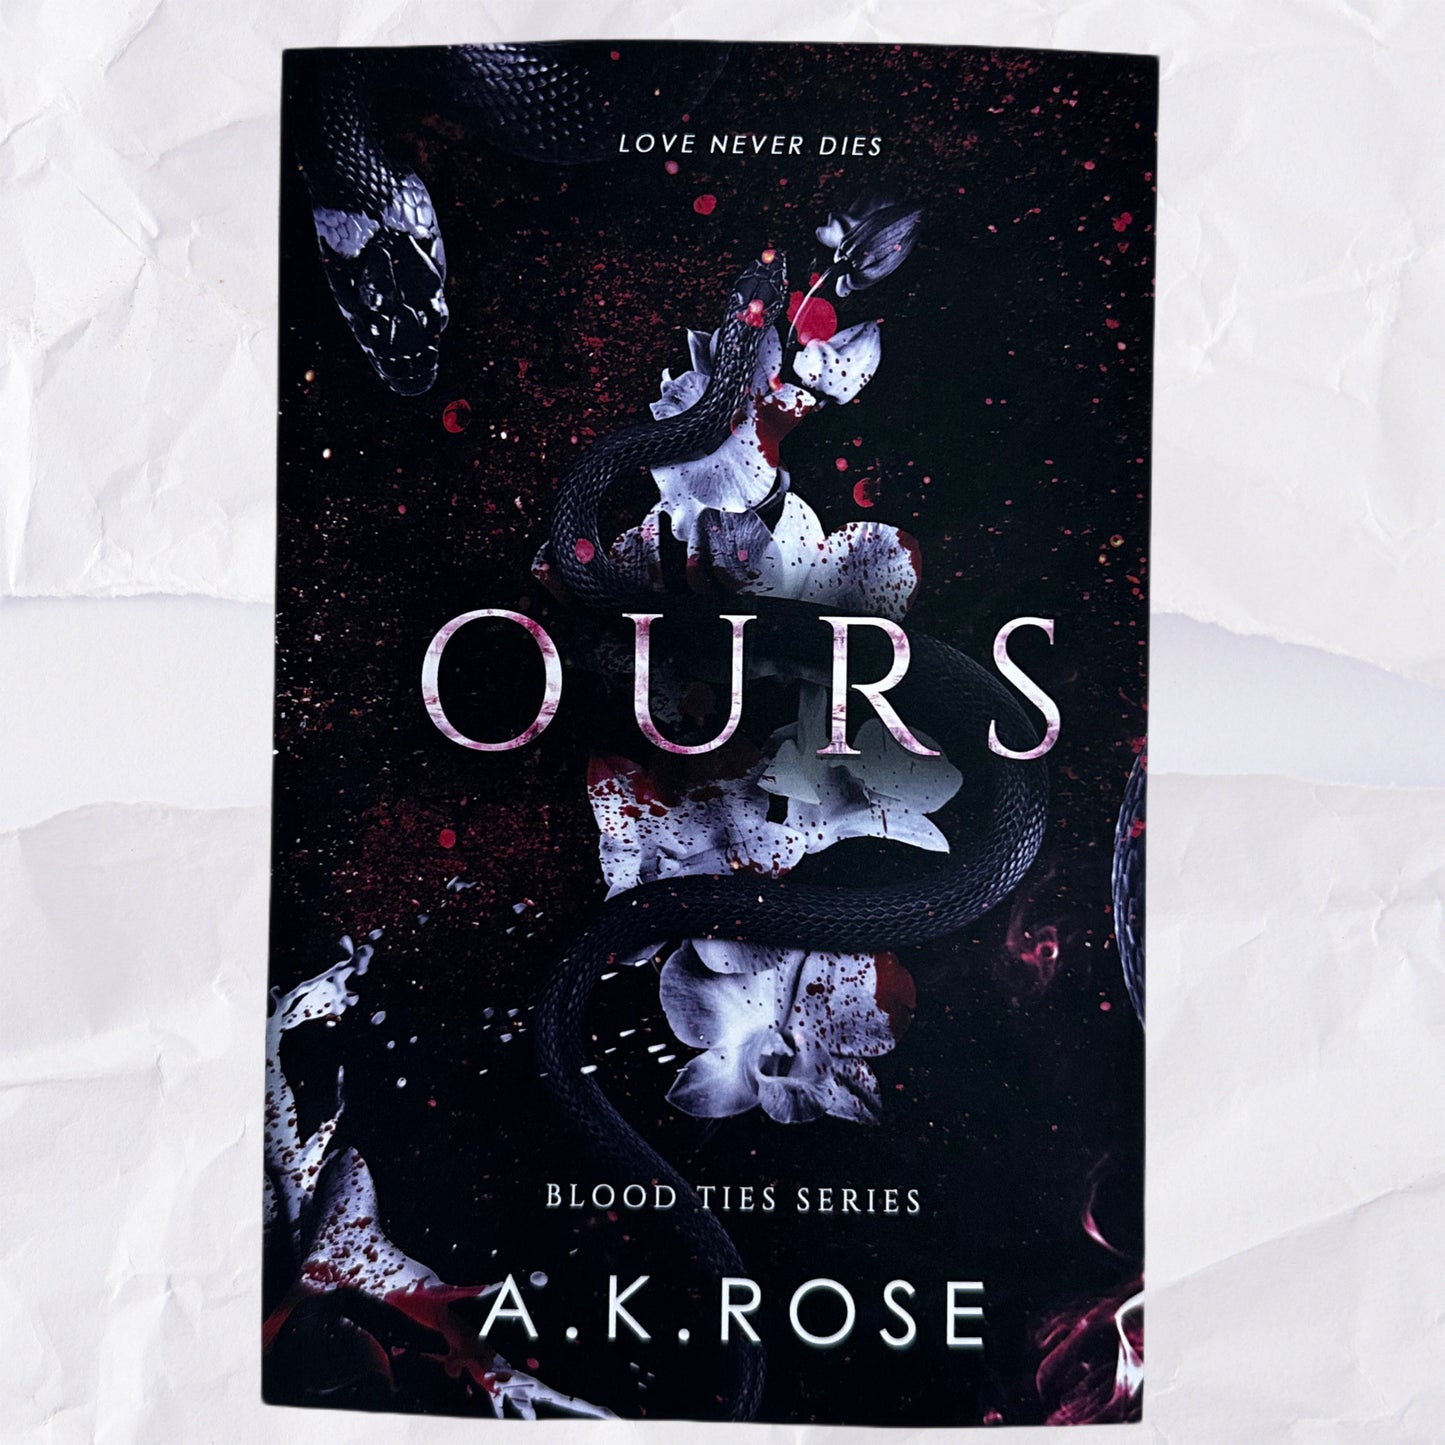 Ours (Blood Ties #3) by A.K. Rose